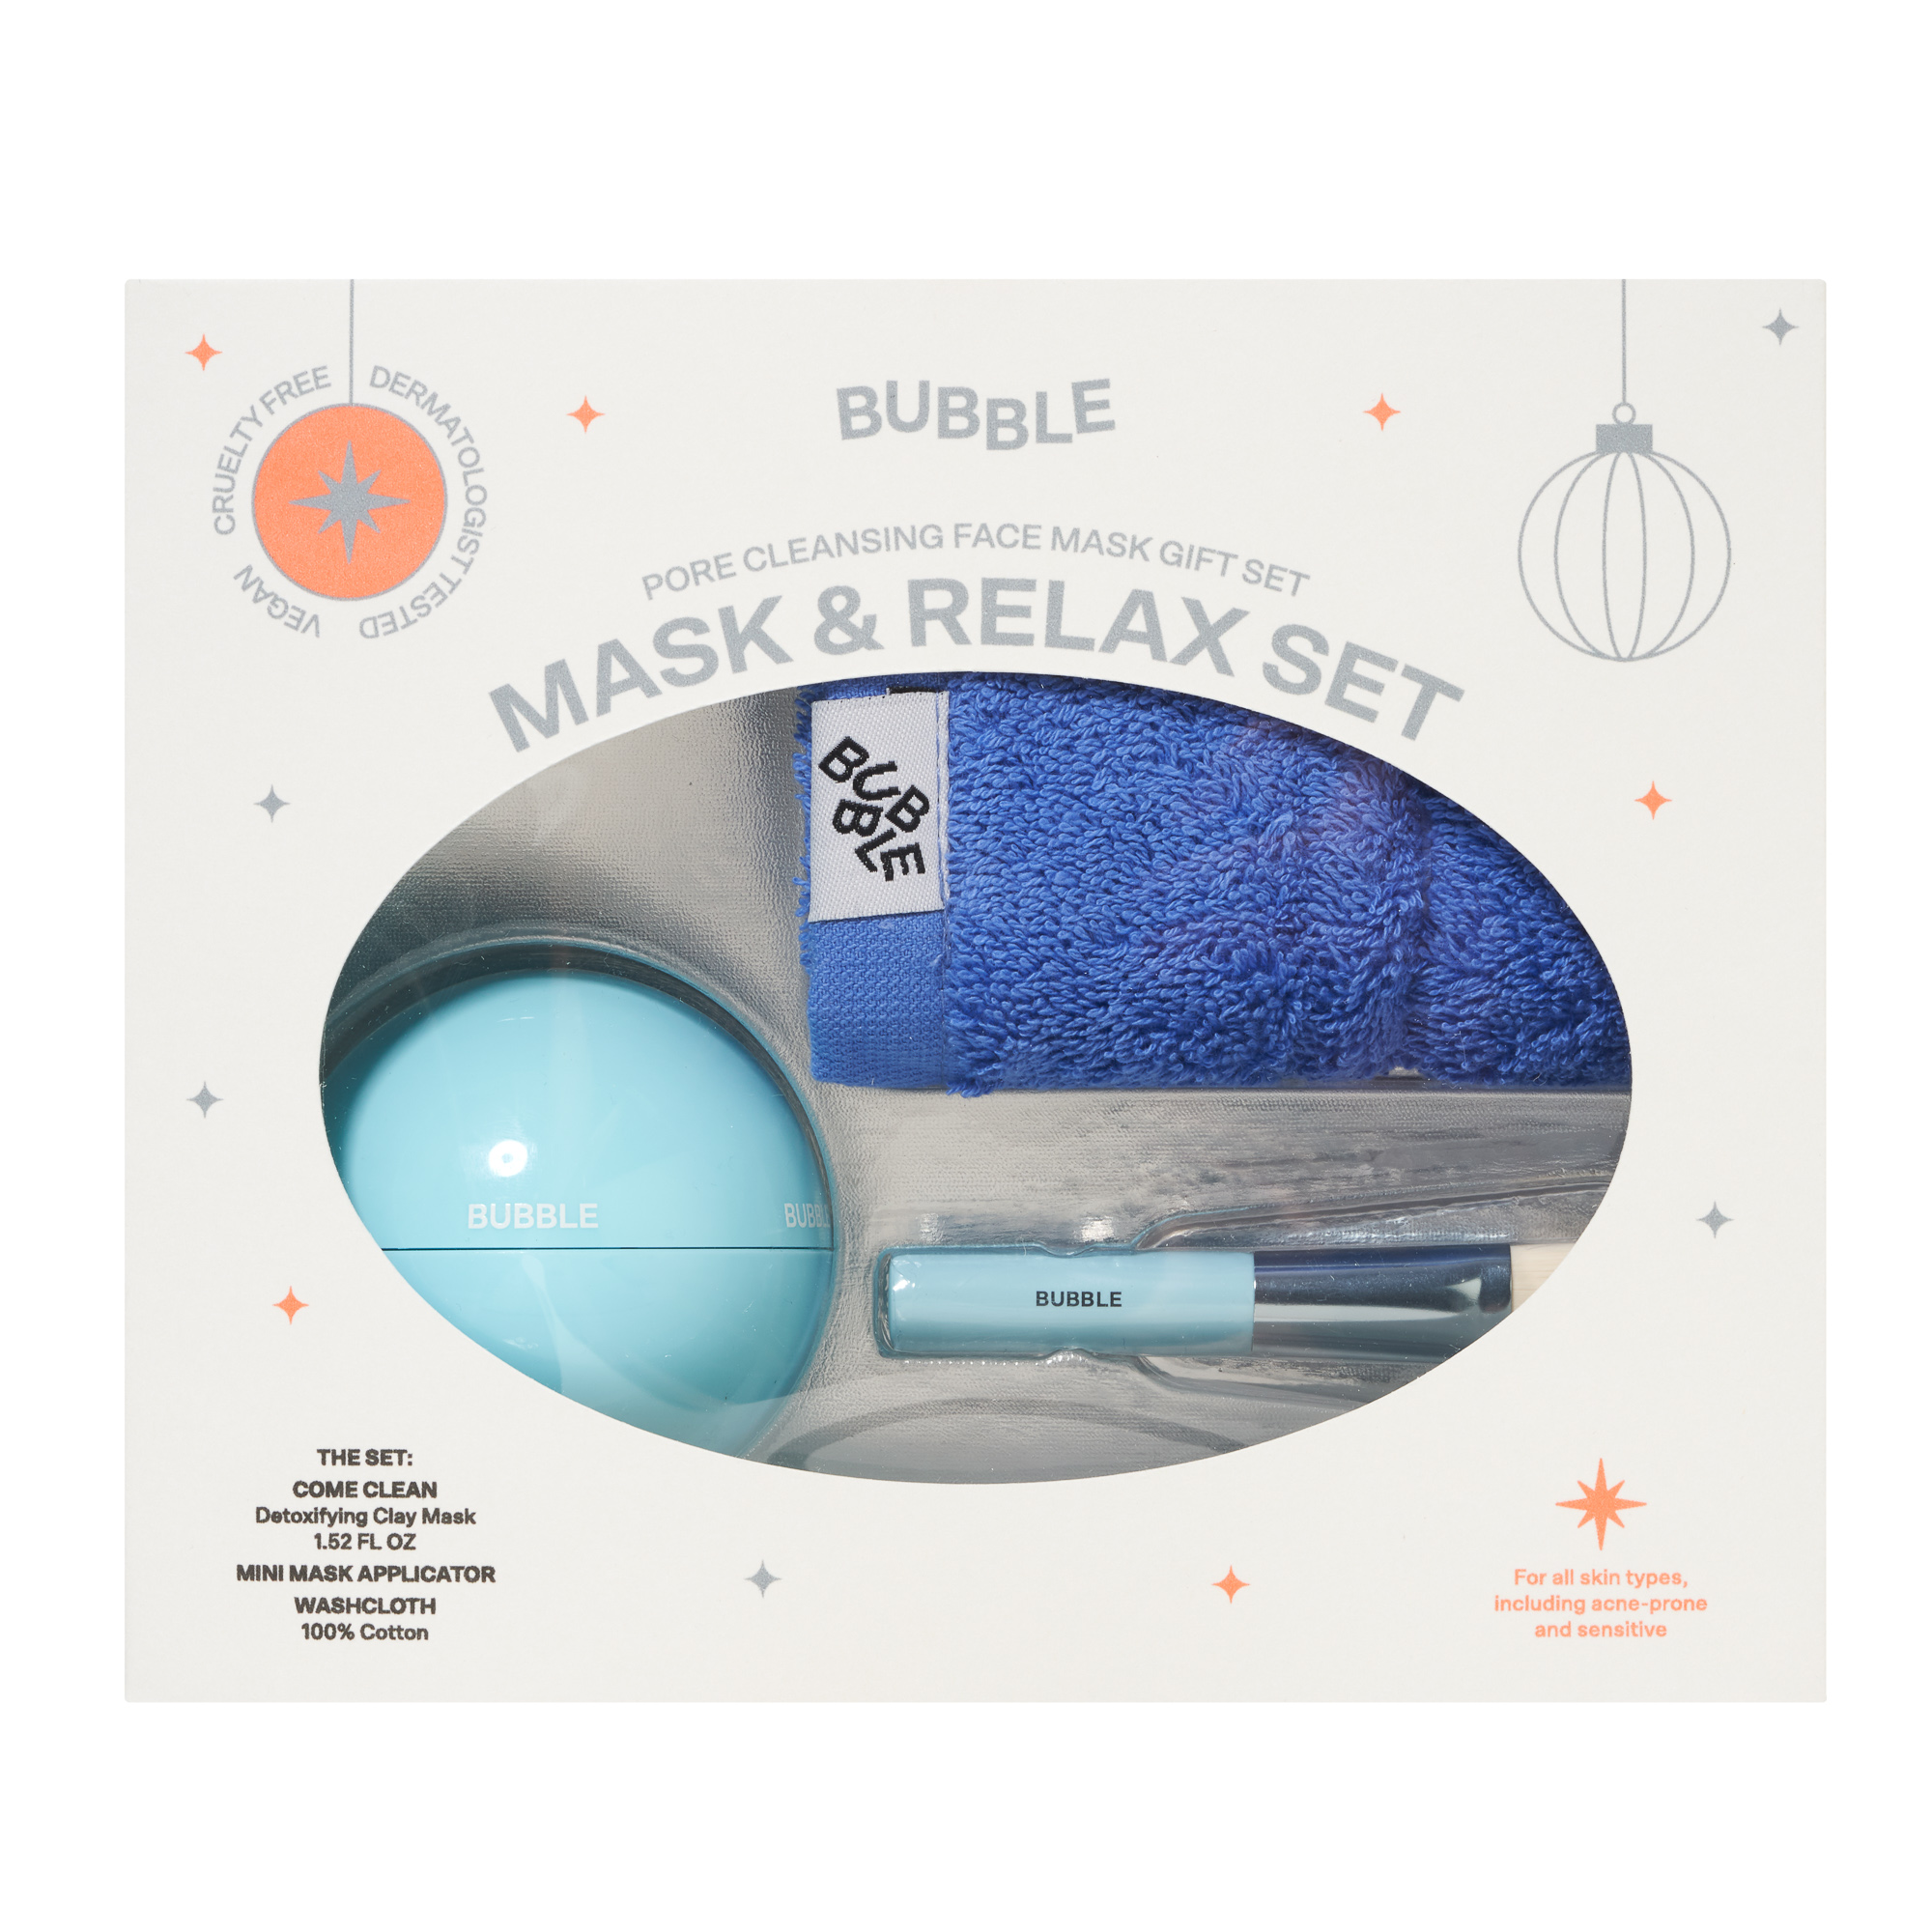 75% Off Bubble Skincare Sets- $4.99 each (free ship with Walmart+ or $35 min)